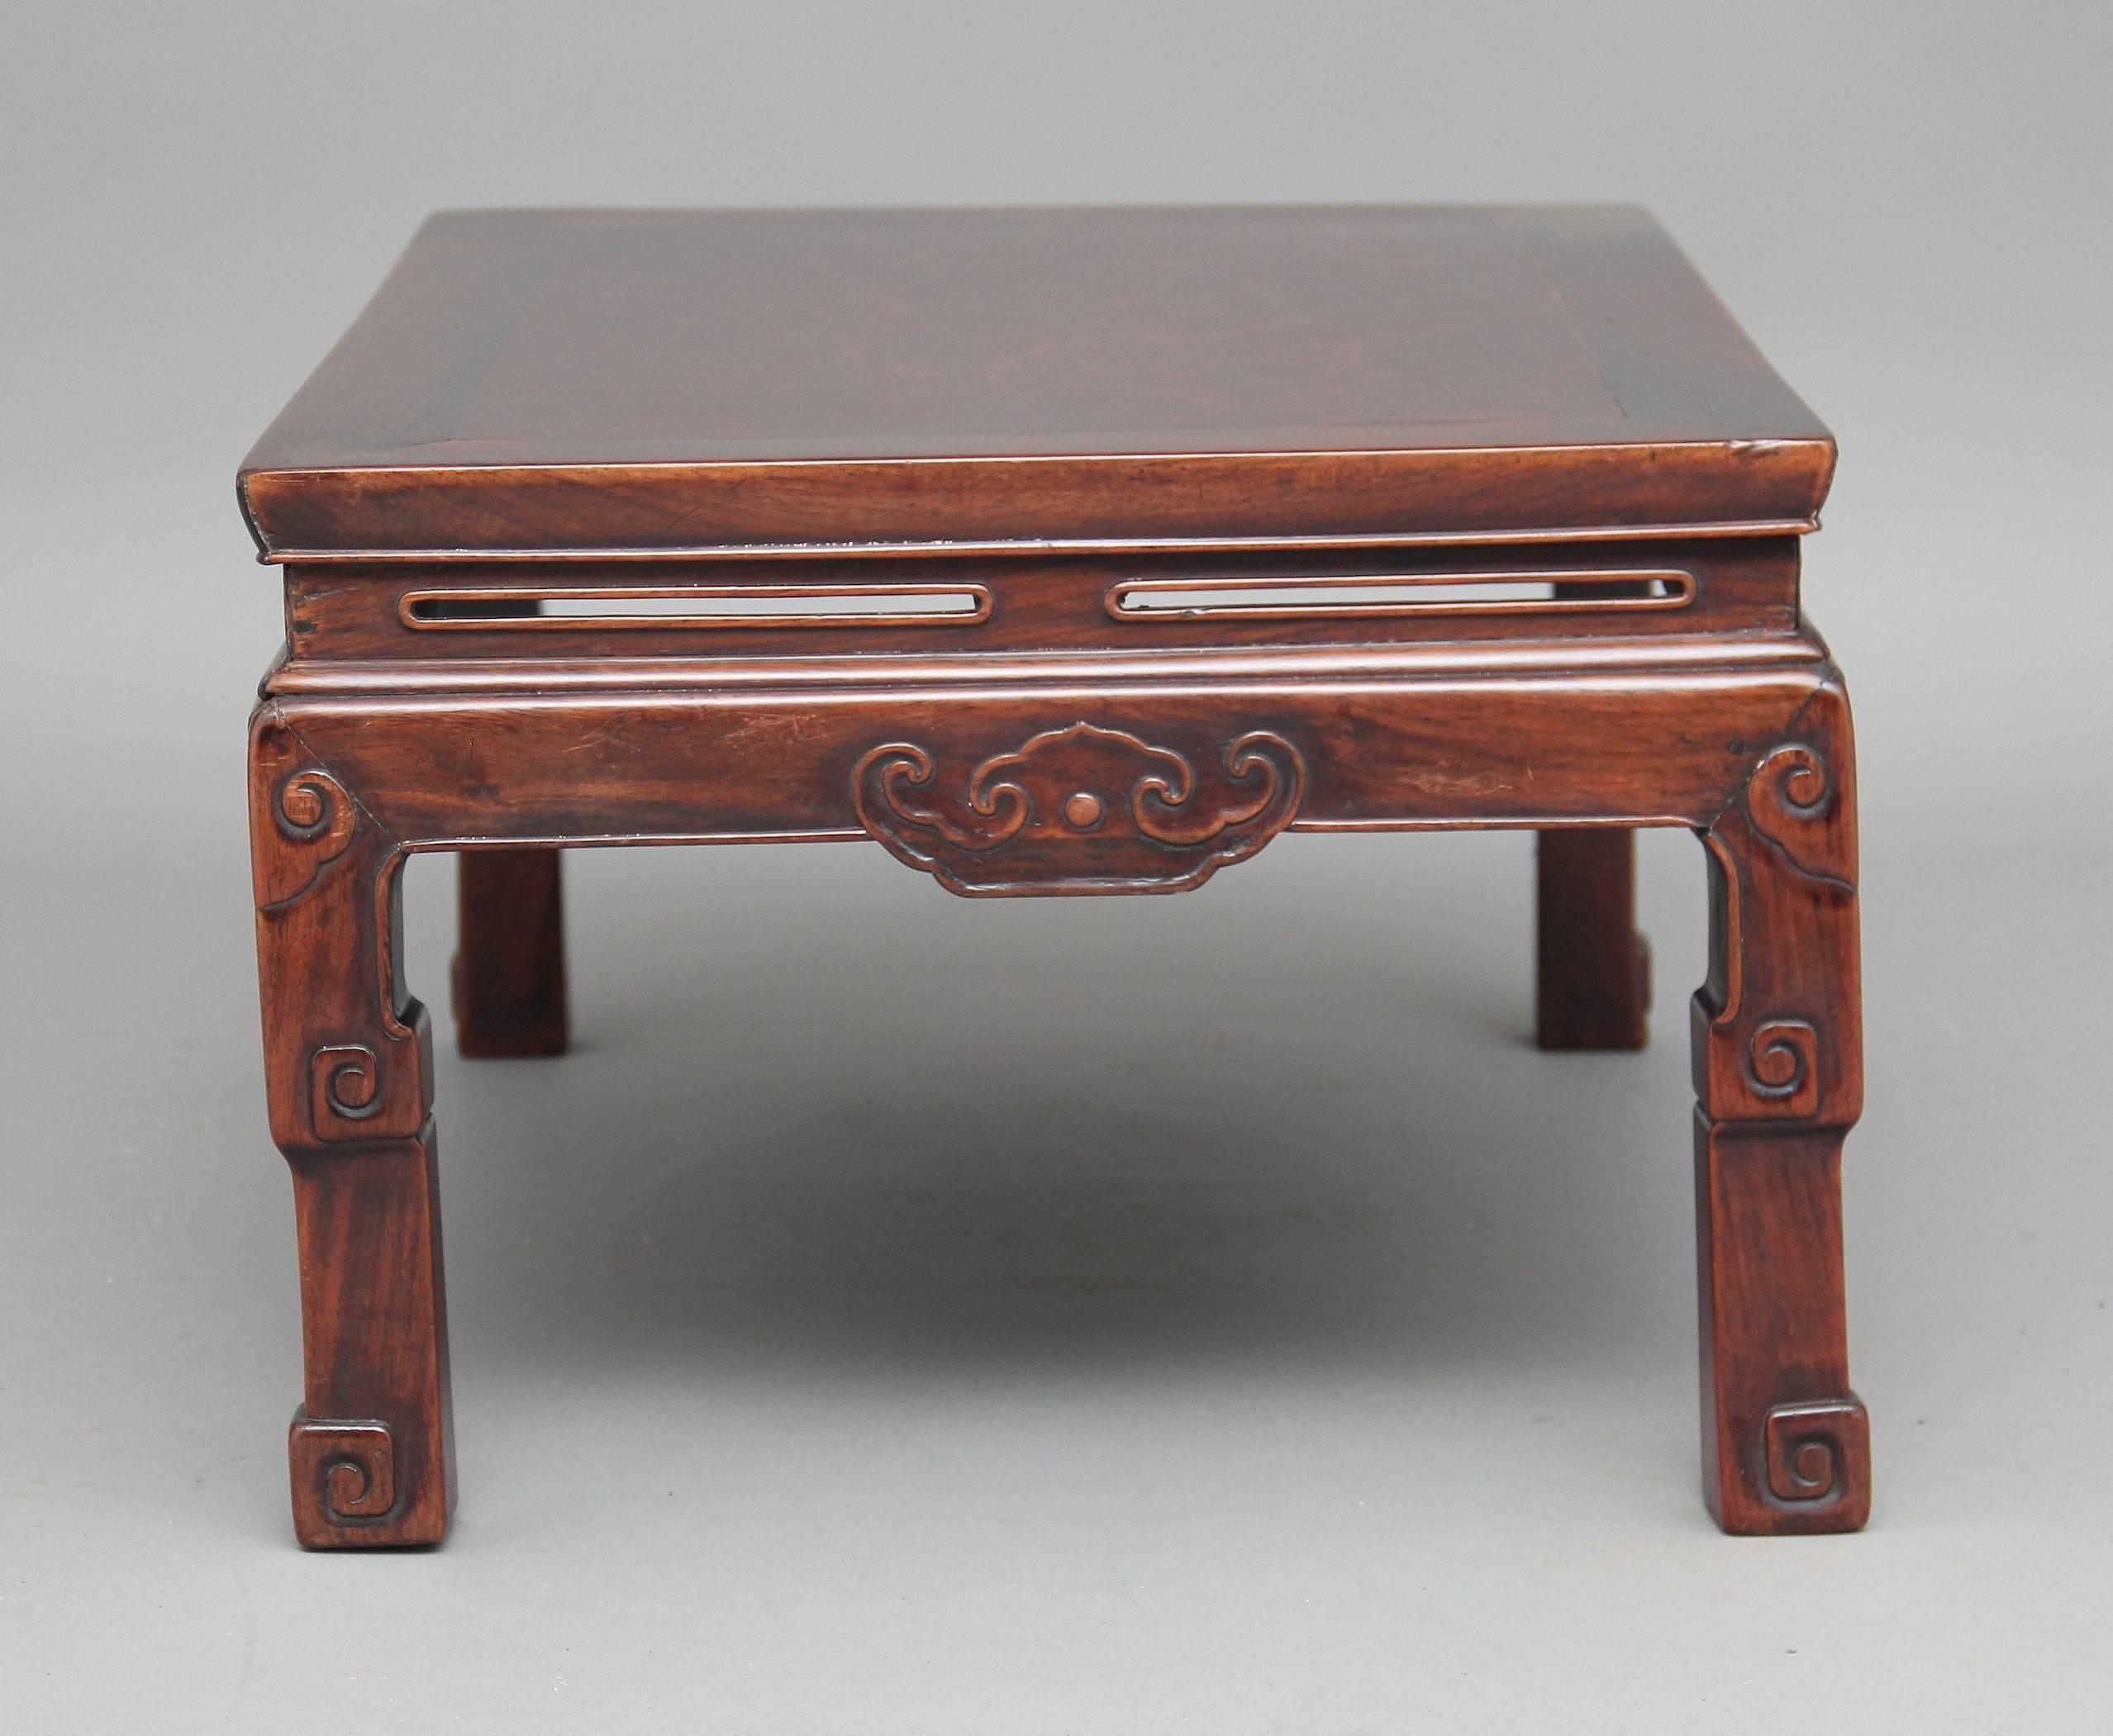 19th century rosewood Chinese coffee table, the rectangular top with pierced decoration around the sides and front having a carved pattern below, supported on square legs ending on carved and scroll feet, circa 1880.

Height: 13